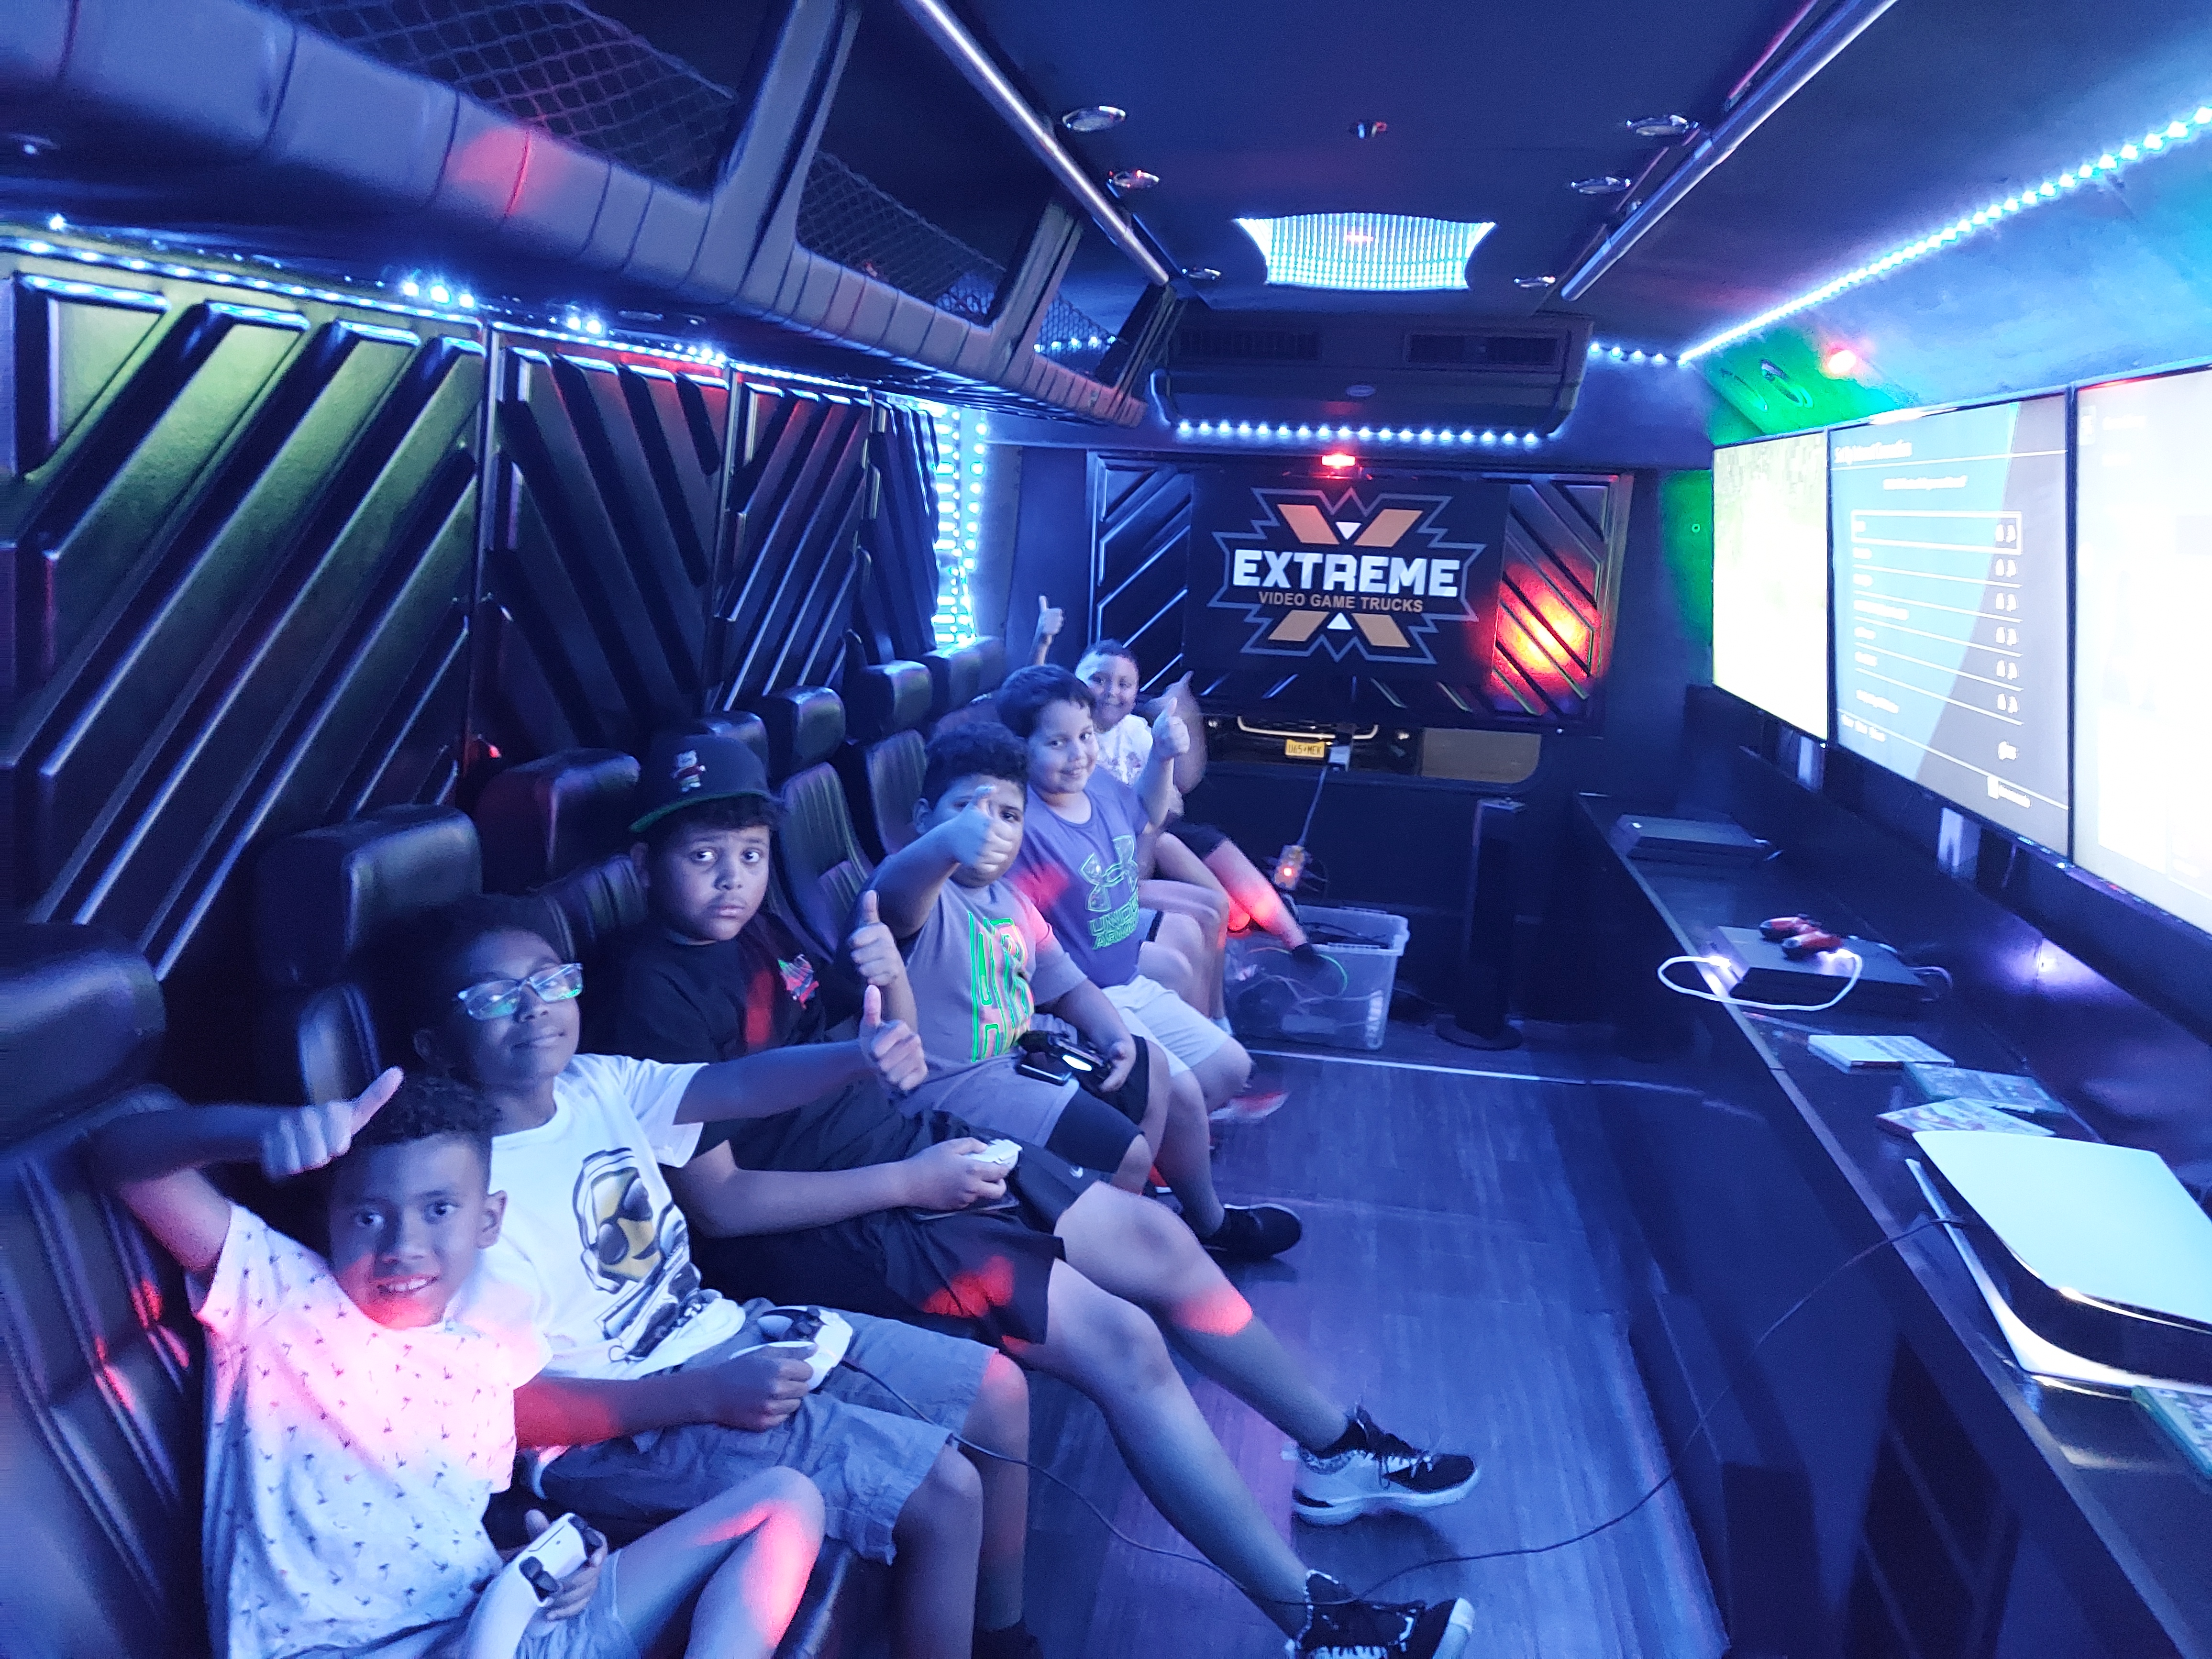 Video game party bus - Extreme Video Game Zone